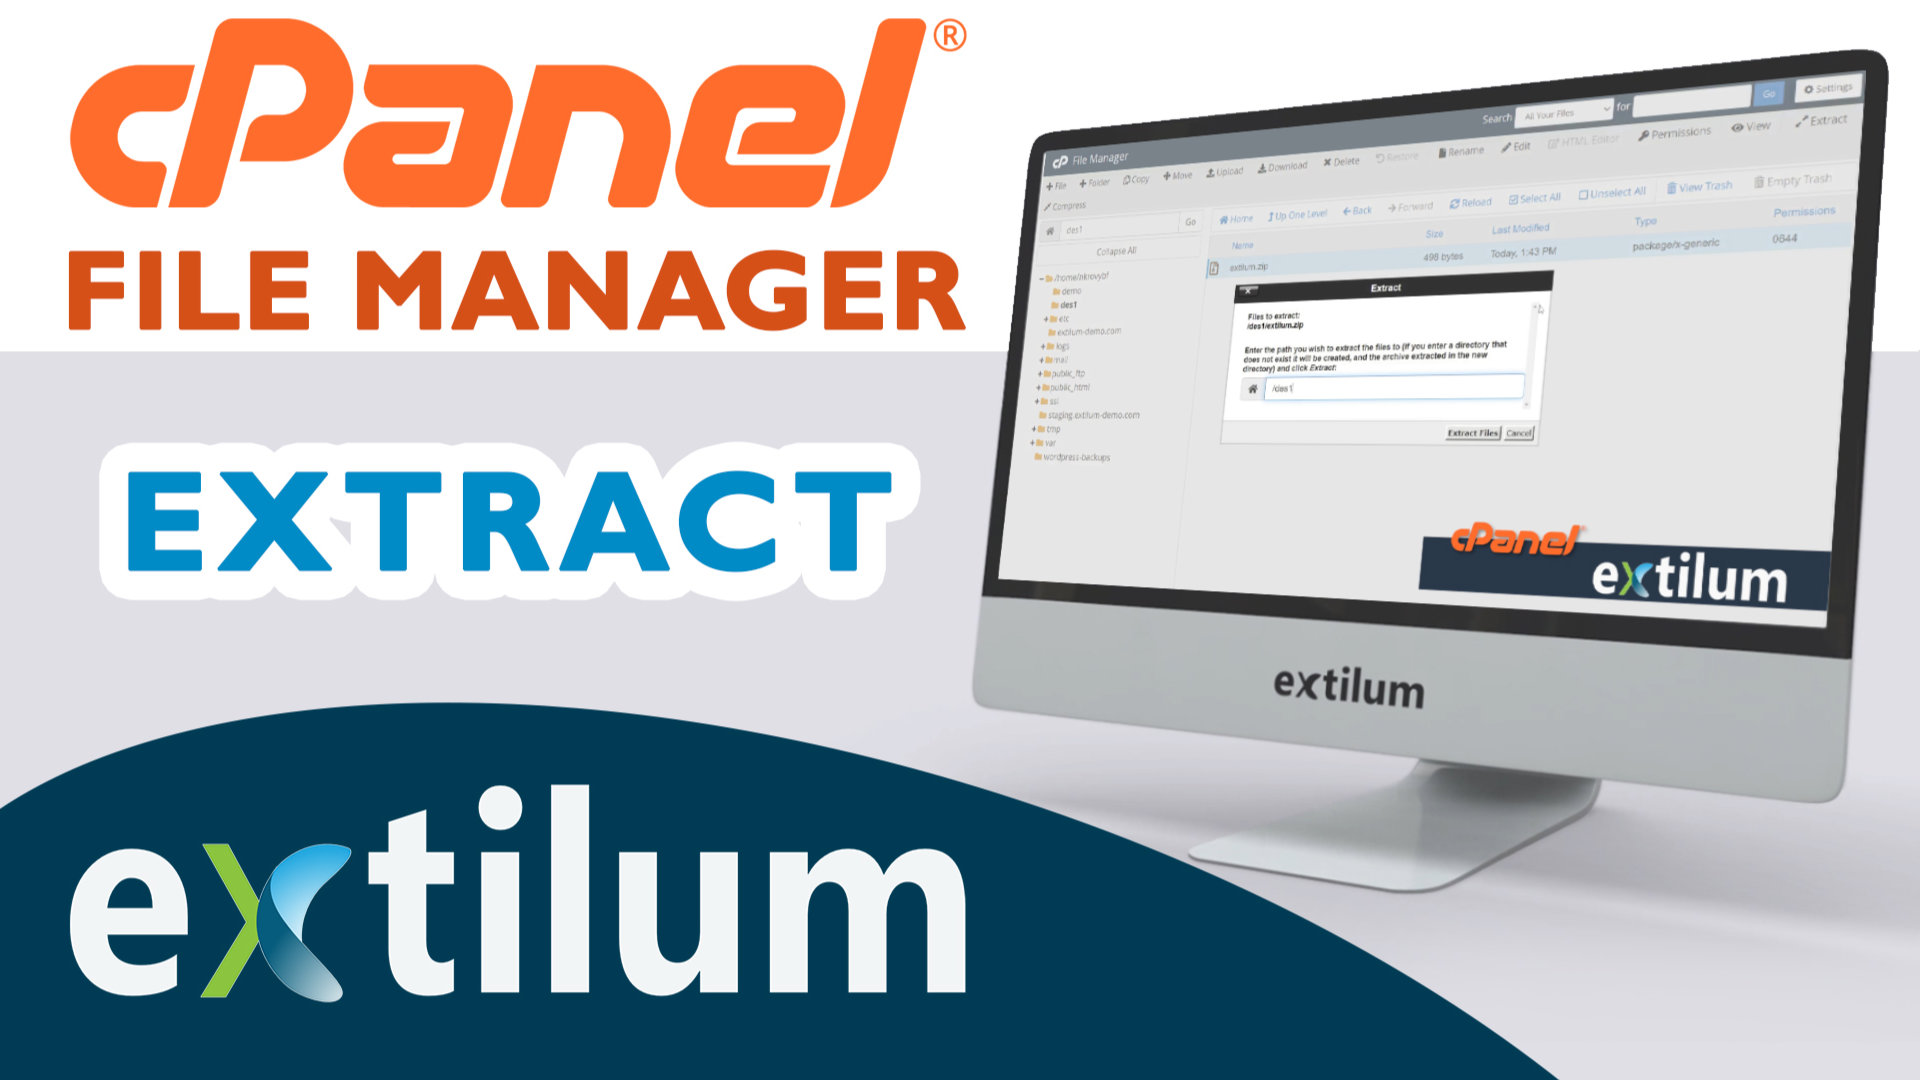 Extilum cpanel - file manager - extract